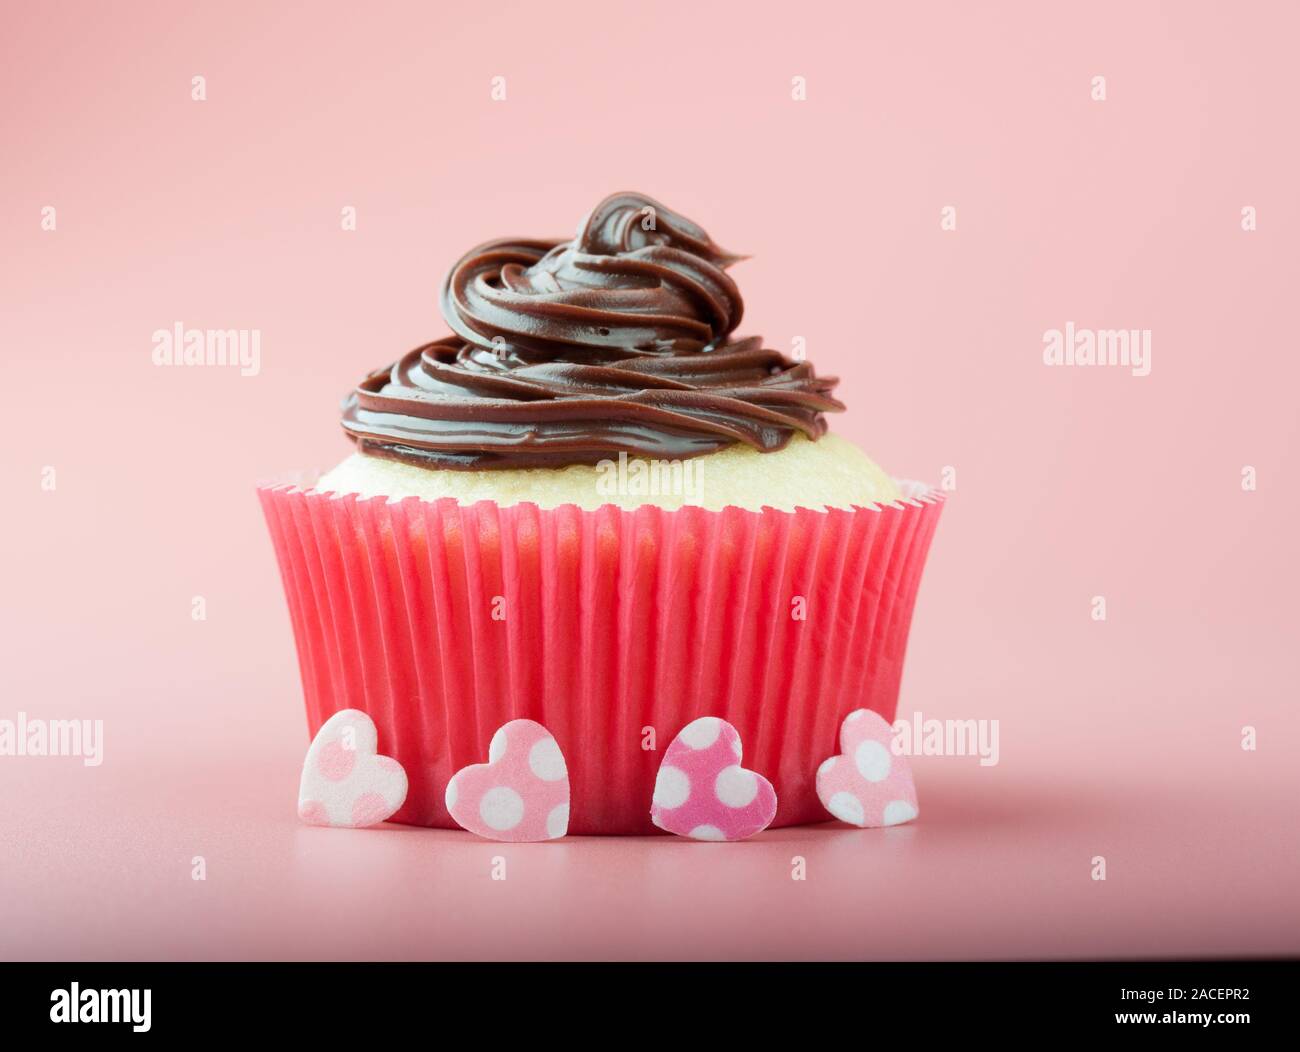 Vanilla cupcake with chocolate icing in nice paper mold, earths and pink background Stock Photo